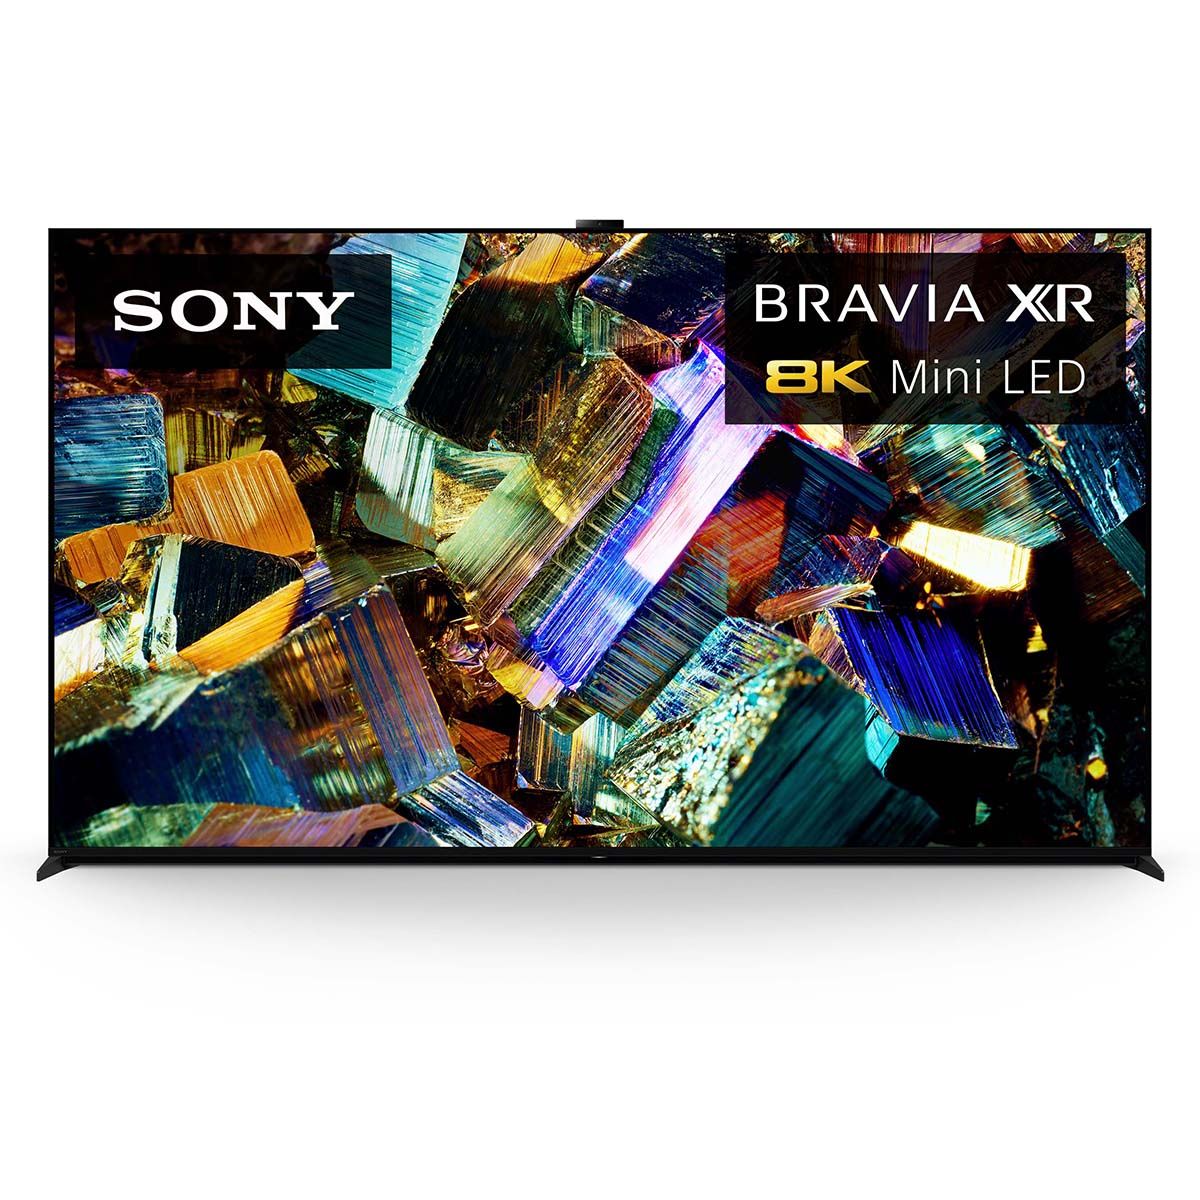 Best Sony TV deals: Save on best-in-class 4K TVs and 8K TVs